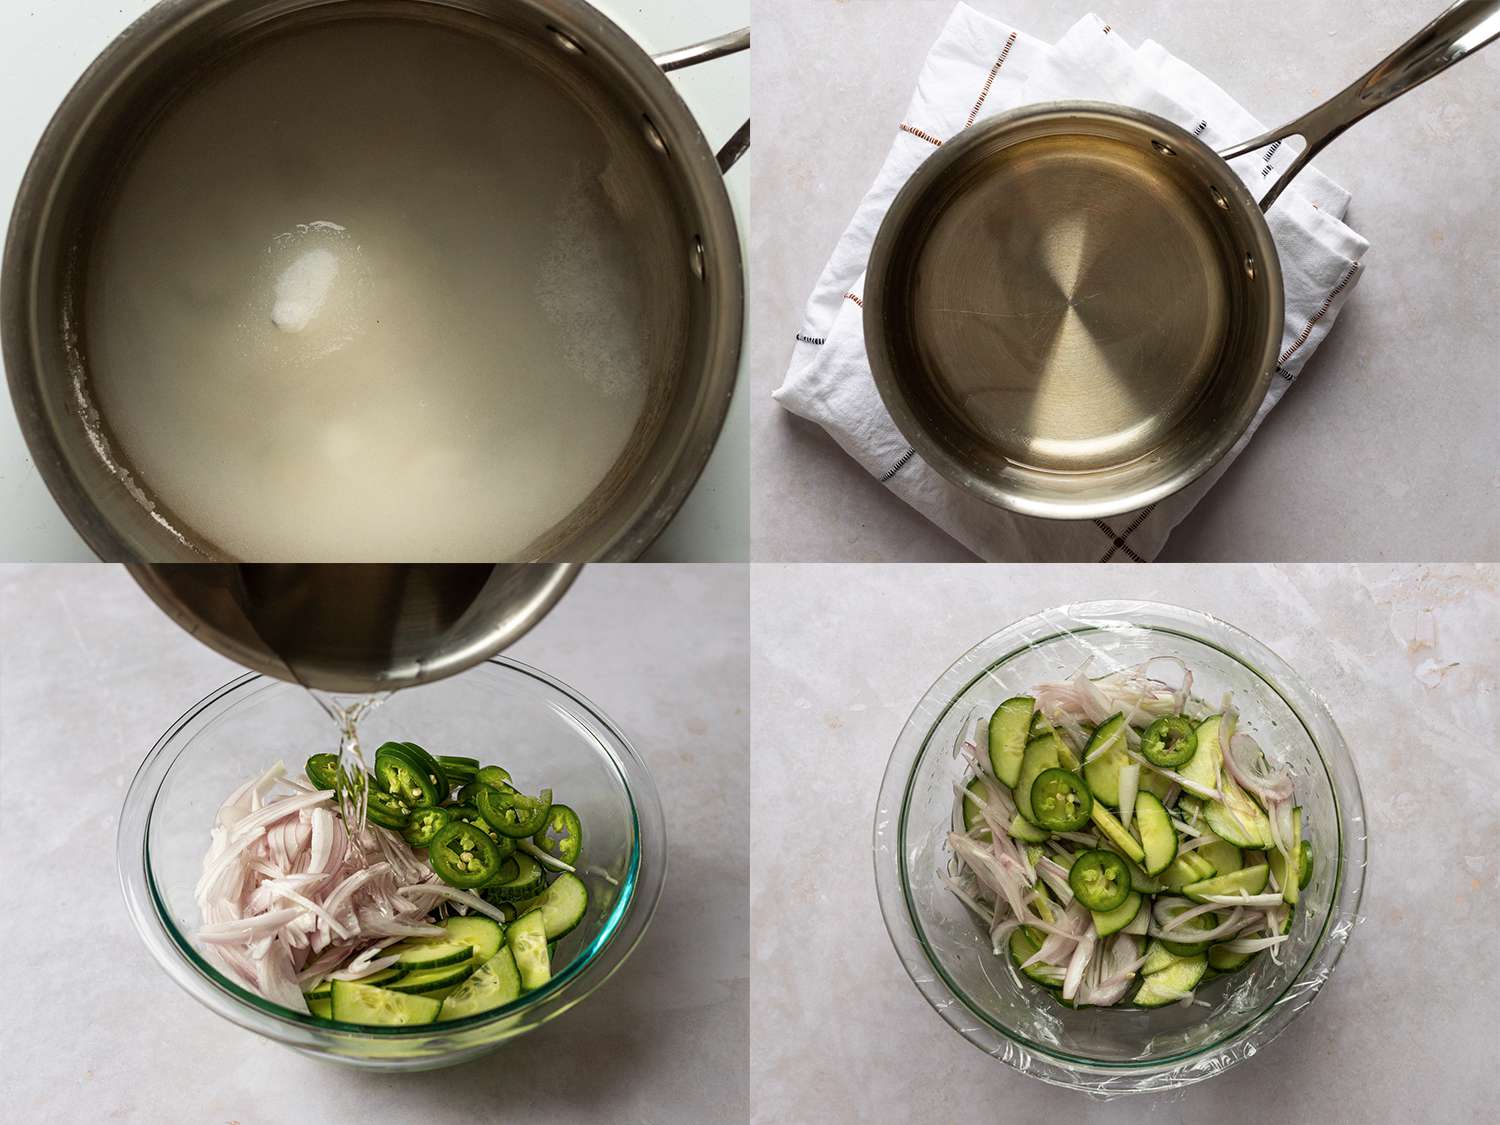 A four-image collage. The top-left image shows sugar, vinegar, water, and salt combined in a small saucepan over medium heat, with the sugar and salt not yet dissolved. The top-right image shows the saucepan, now removed from the heat, with the sugar and salt completely dissolved into the vinegar and water to form a brine. The bottom-left image shows the cooled brine being poured over the sliced vegetables which are inside of a glass mixing bowl. The bottom-right image shows the vegetables and brine inside of the glass mixing bowl, which is now covered with plastic wrap.